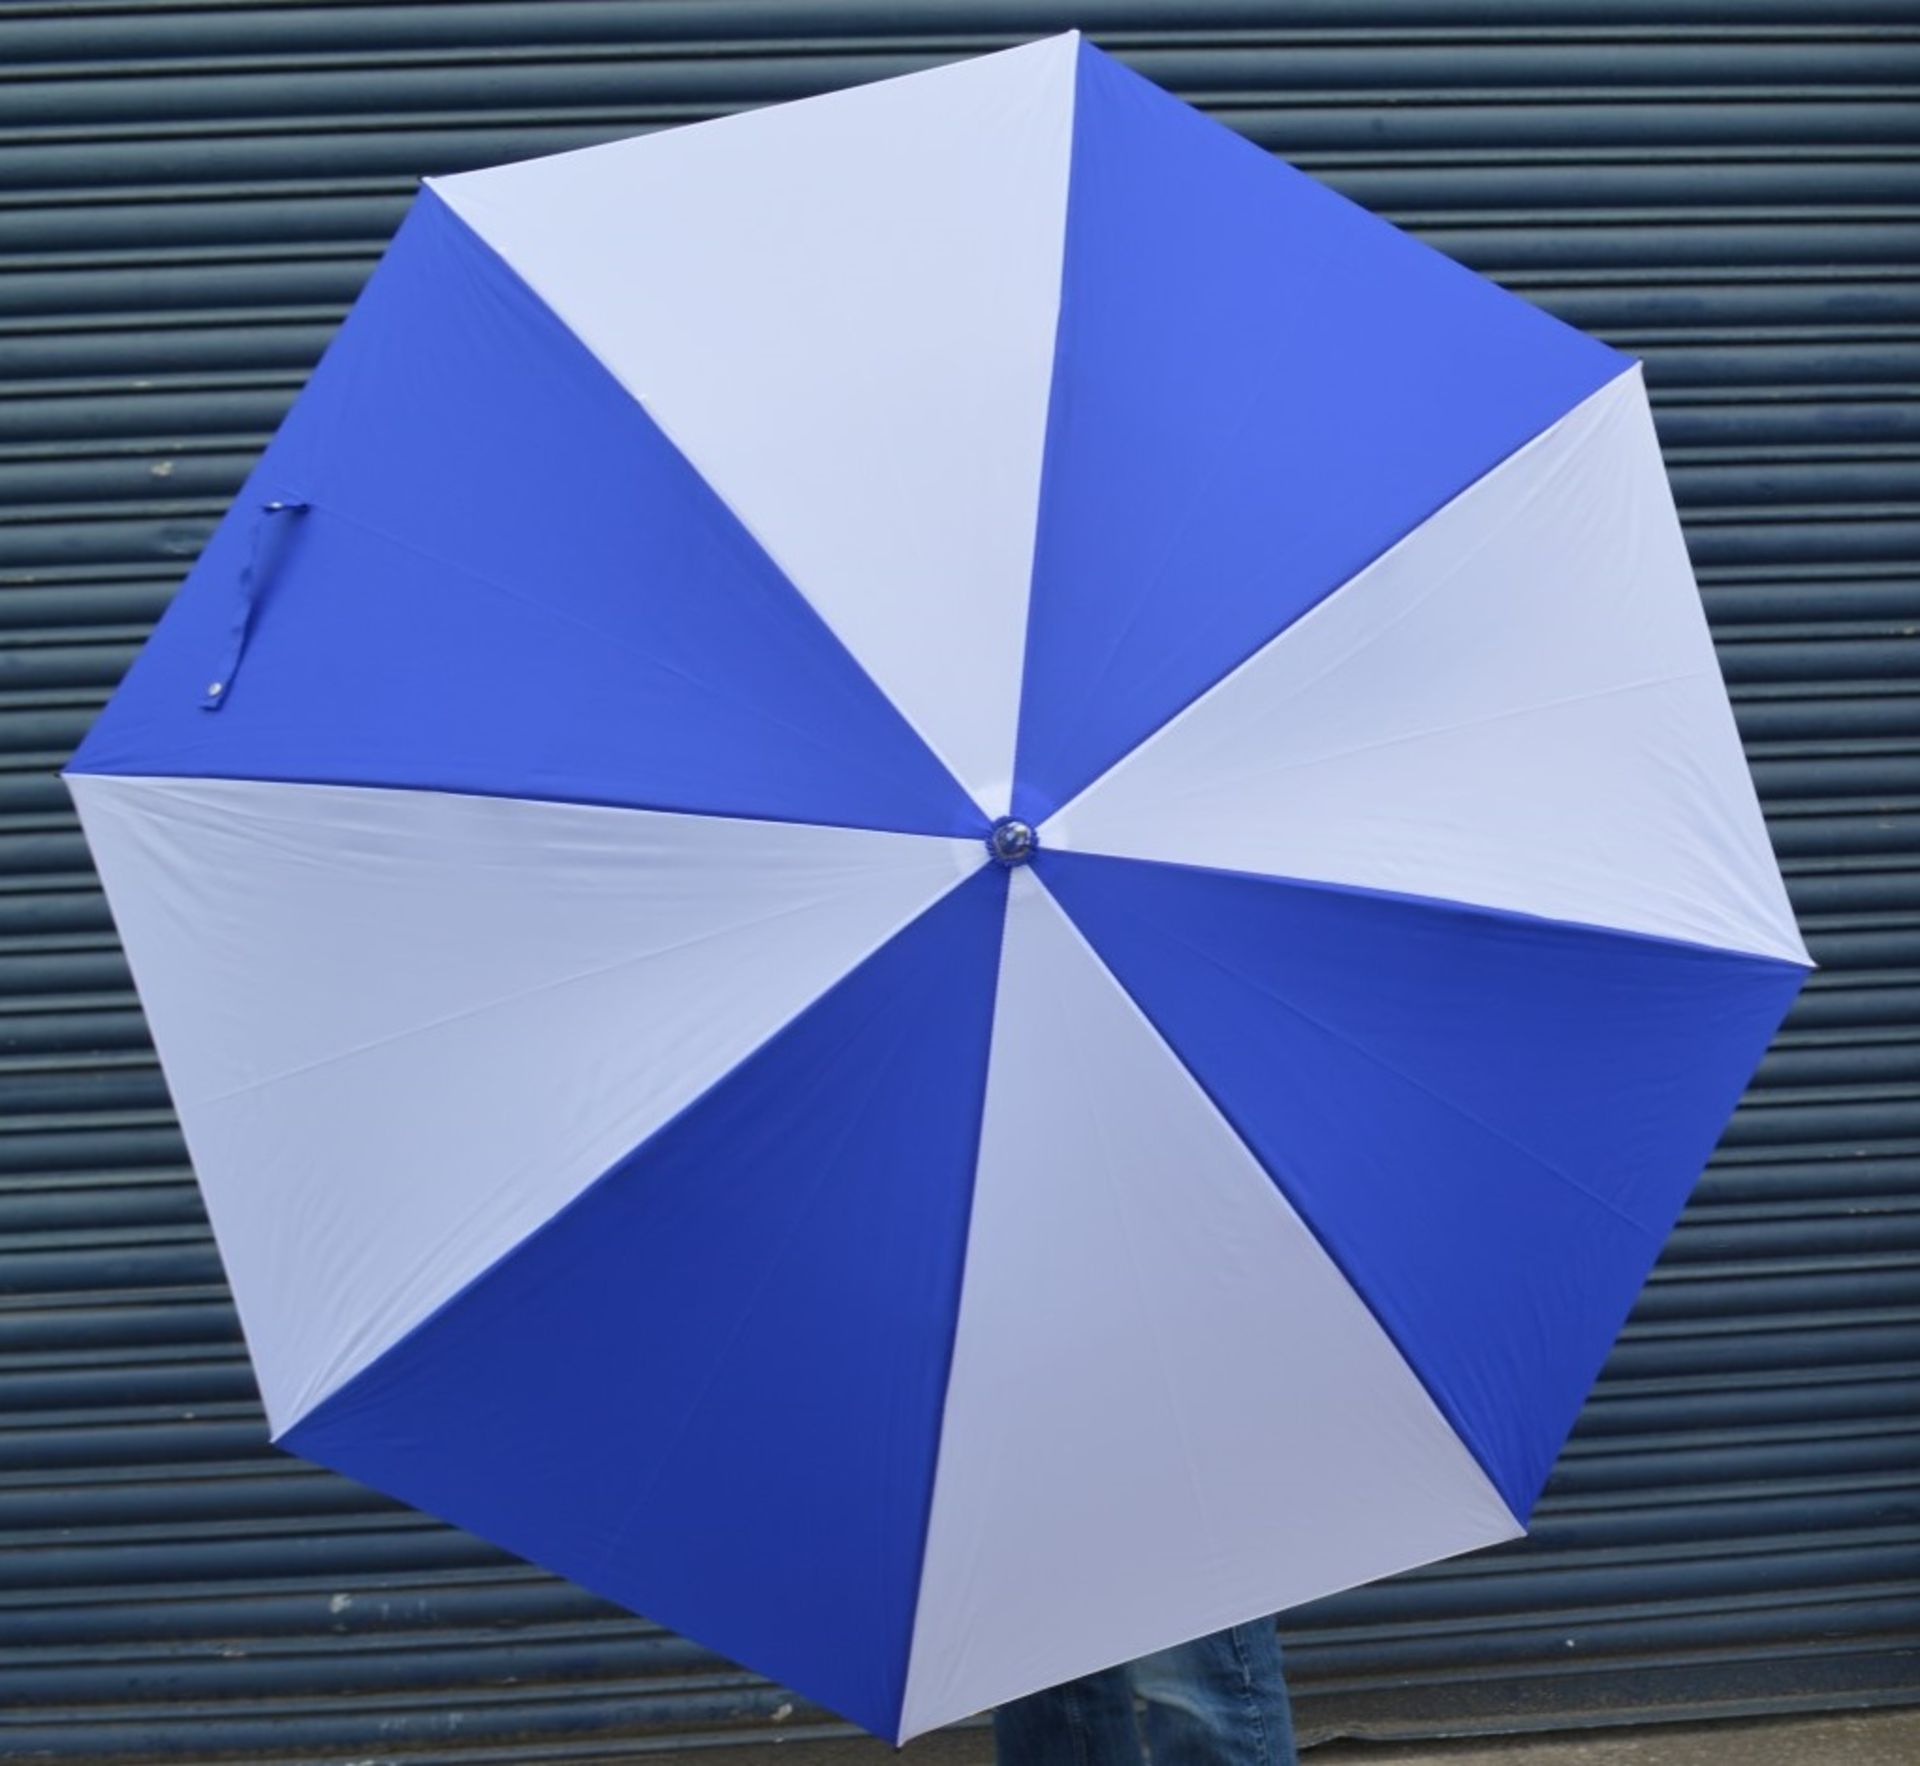 24 x Proline Golf Umbrellas - Colour: Royal Blue And White - Brand New Sealed Stock - Dimensions: